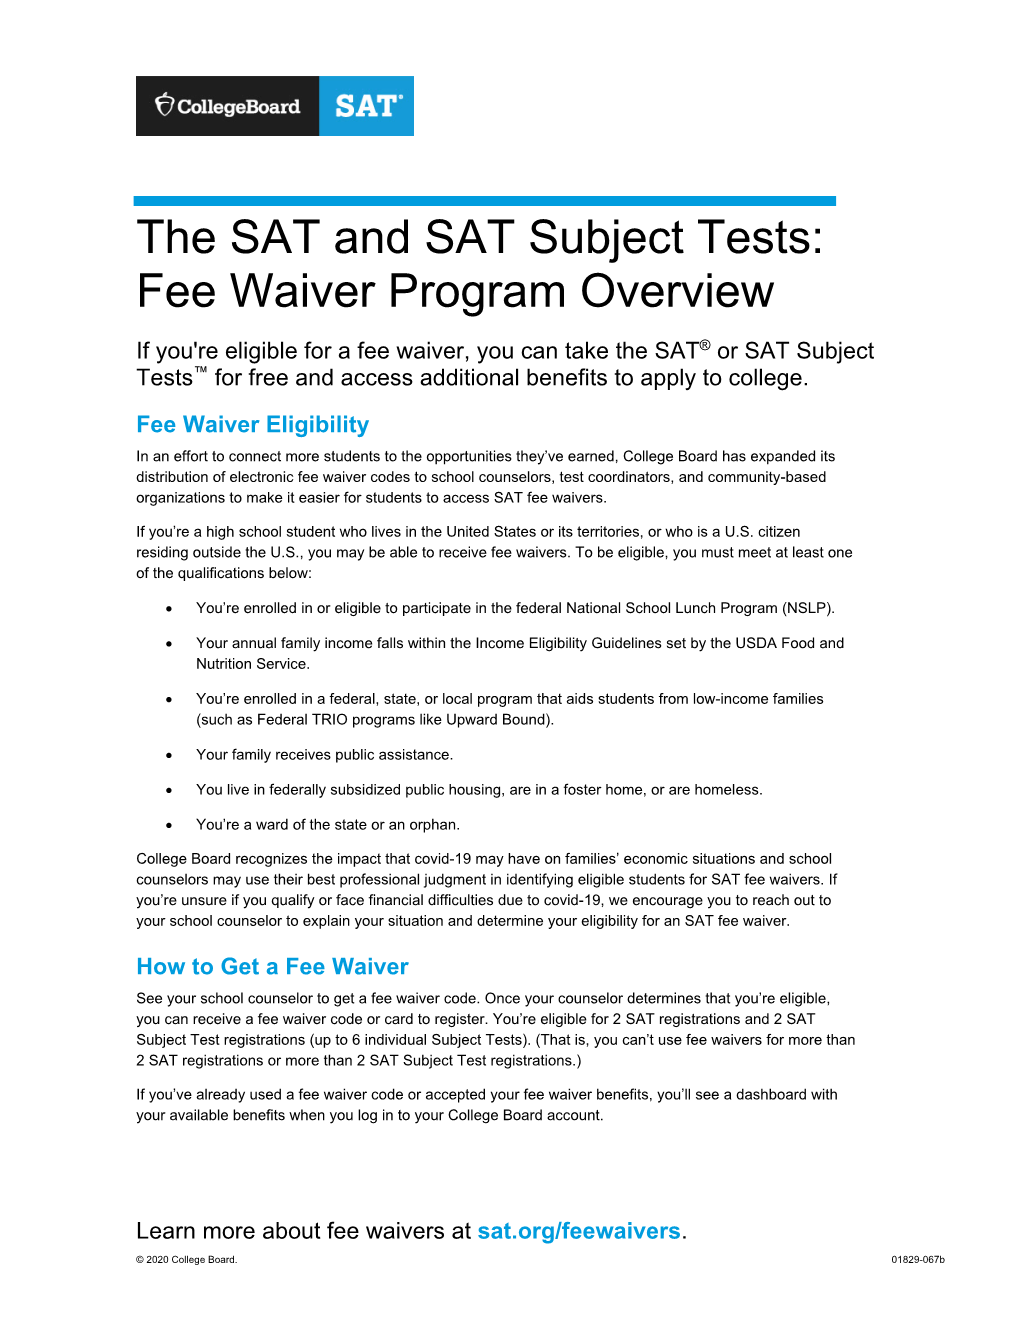 The SAT and SAT Subject Tests: Fee Waiver Program Overview